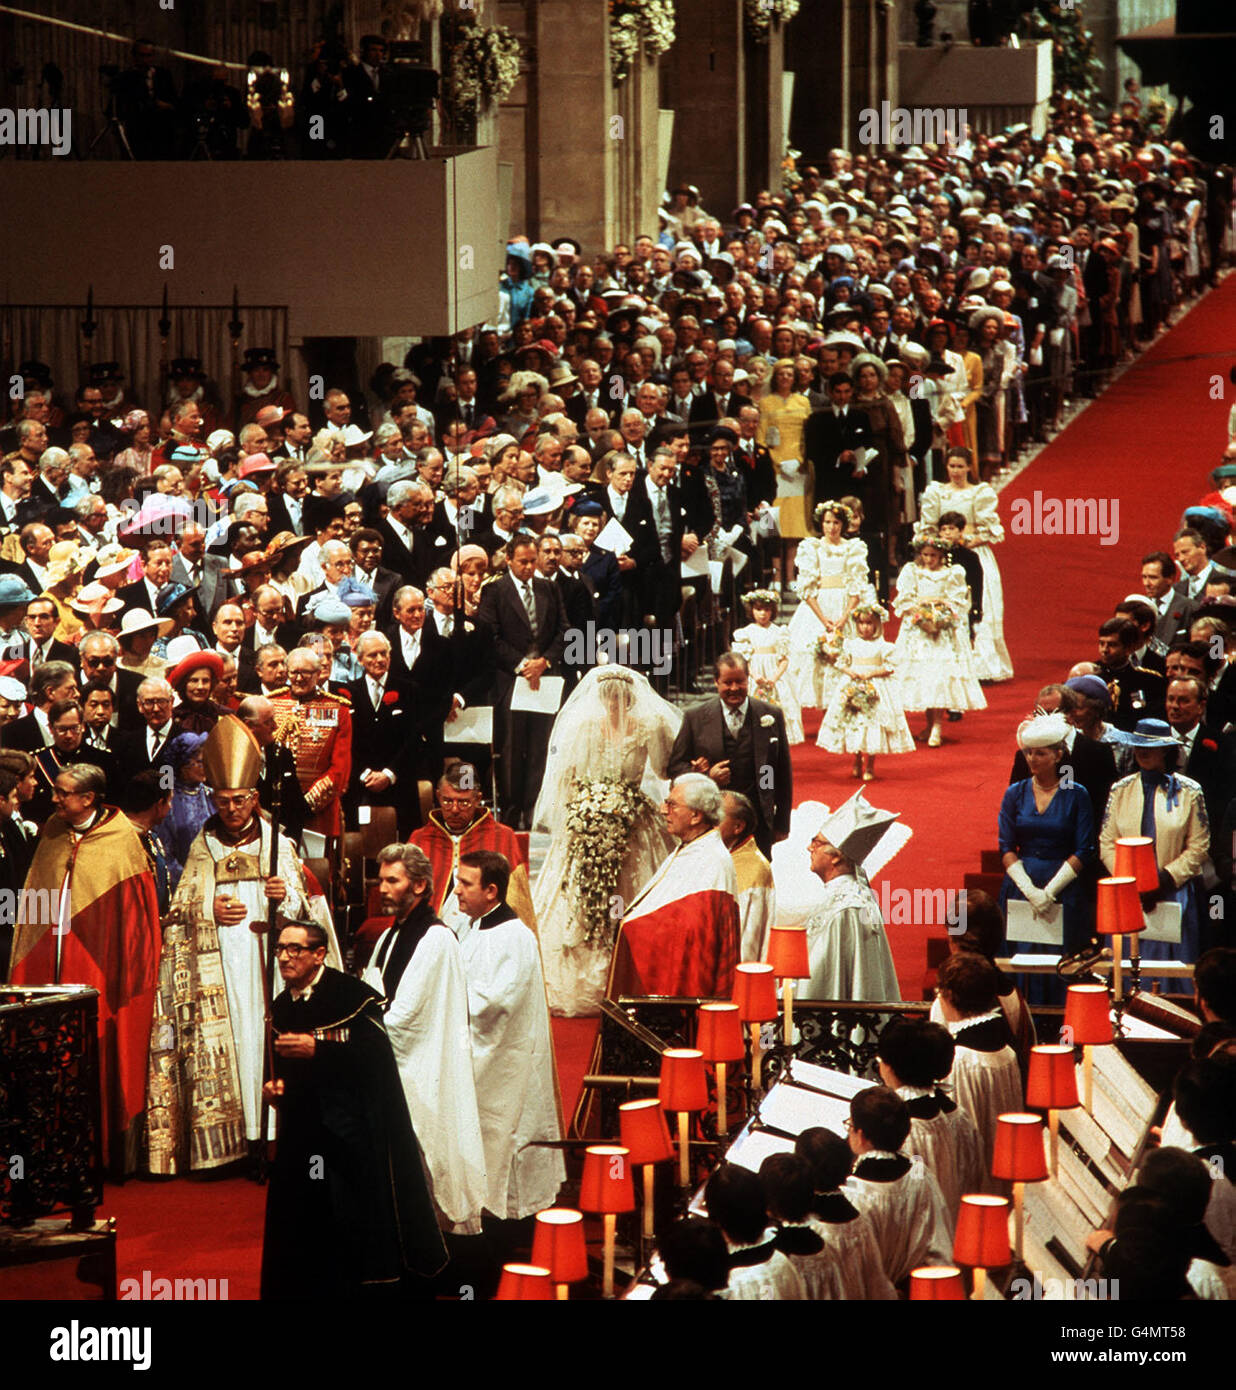 Earl Spencer leads his daughter, Lady Diana Spencer, down the aisle in St Paul's Cathedral, for her wedding to the Prince of Wales. * 29/7/81 of Earl Spencer leading his daughter Lady Diana Spencer down the aisle of St Paul's Cathedral, London, for her wedding to the Prince of Wales. Stock Photo